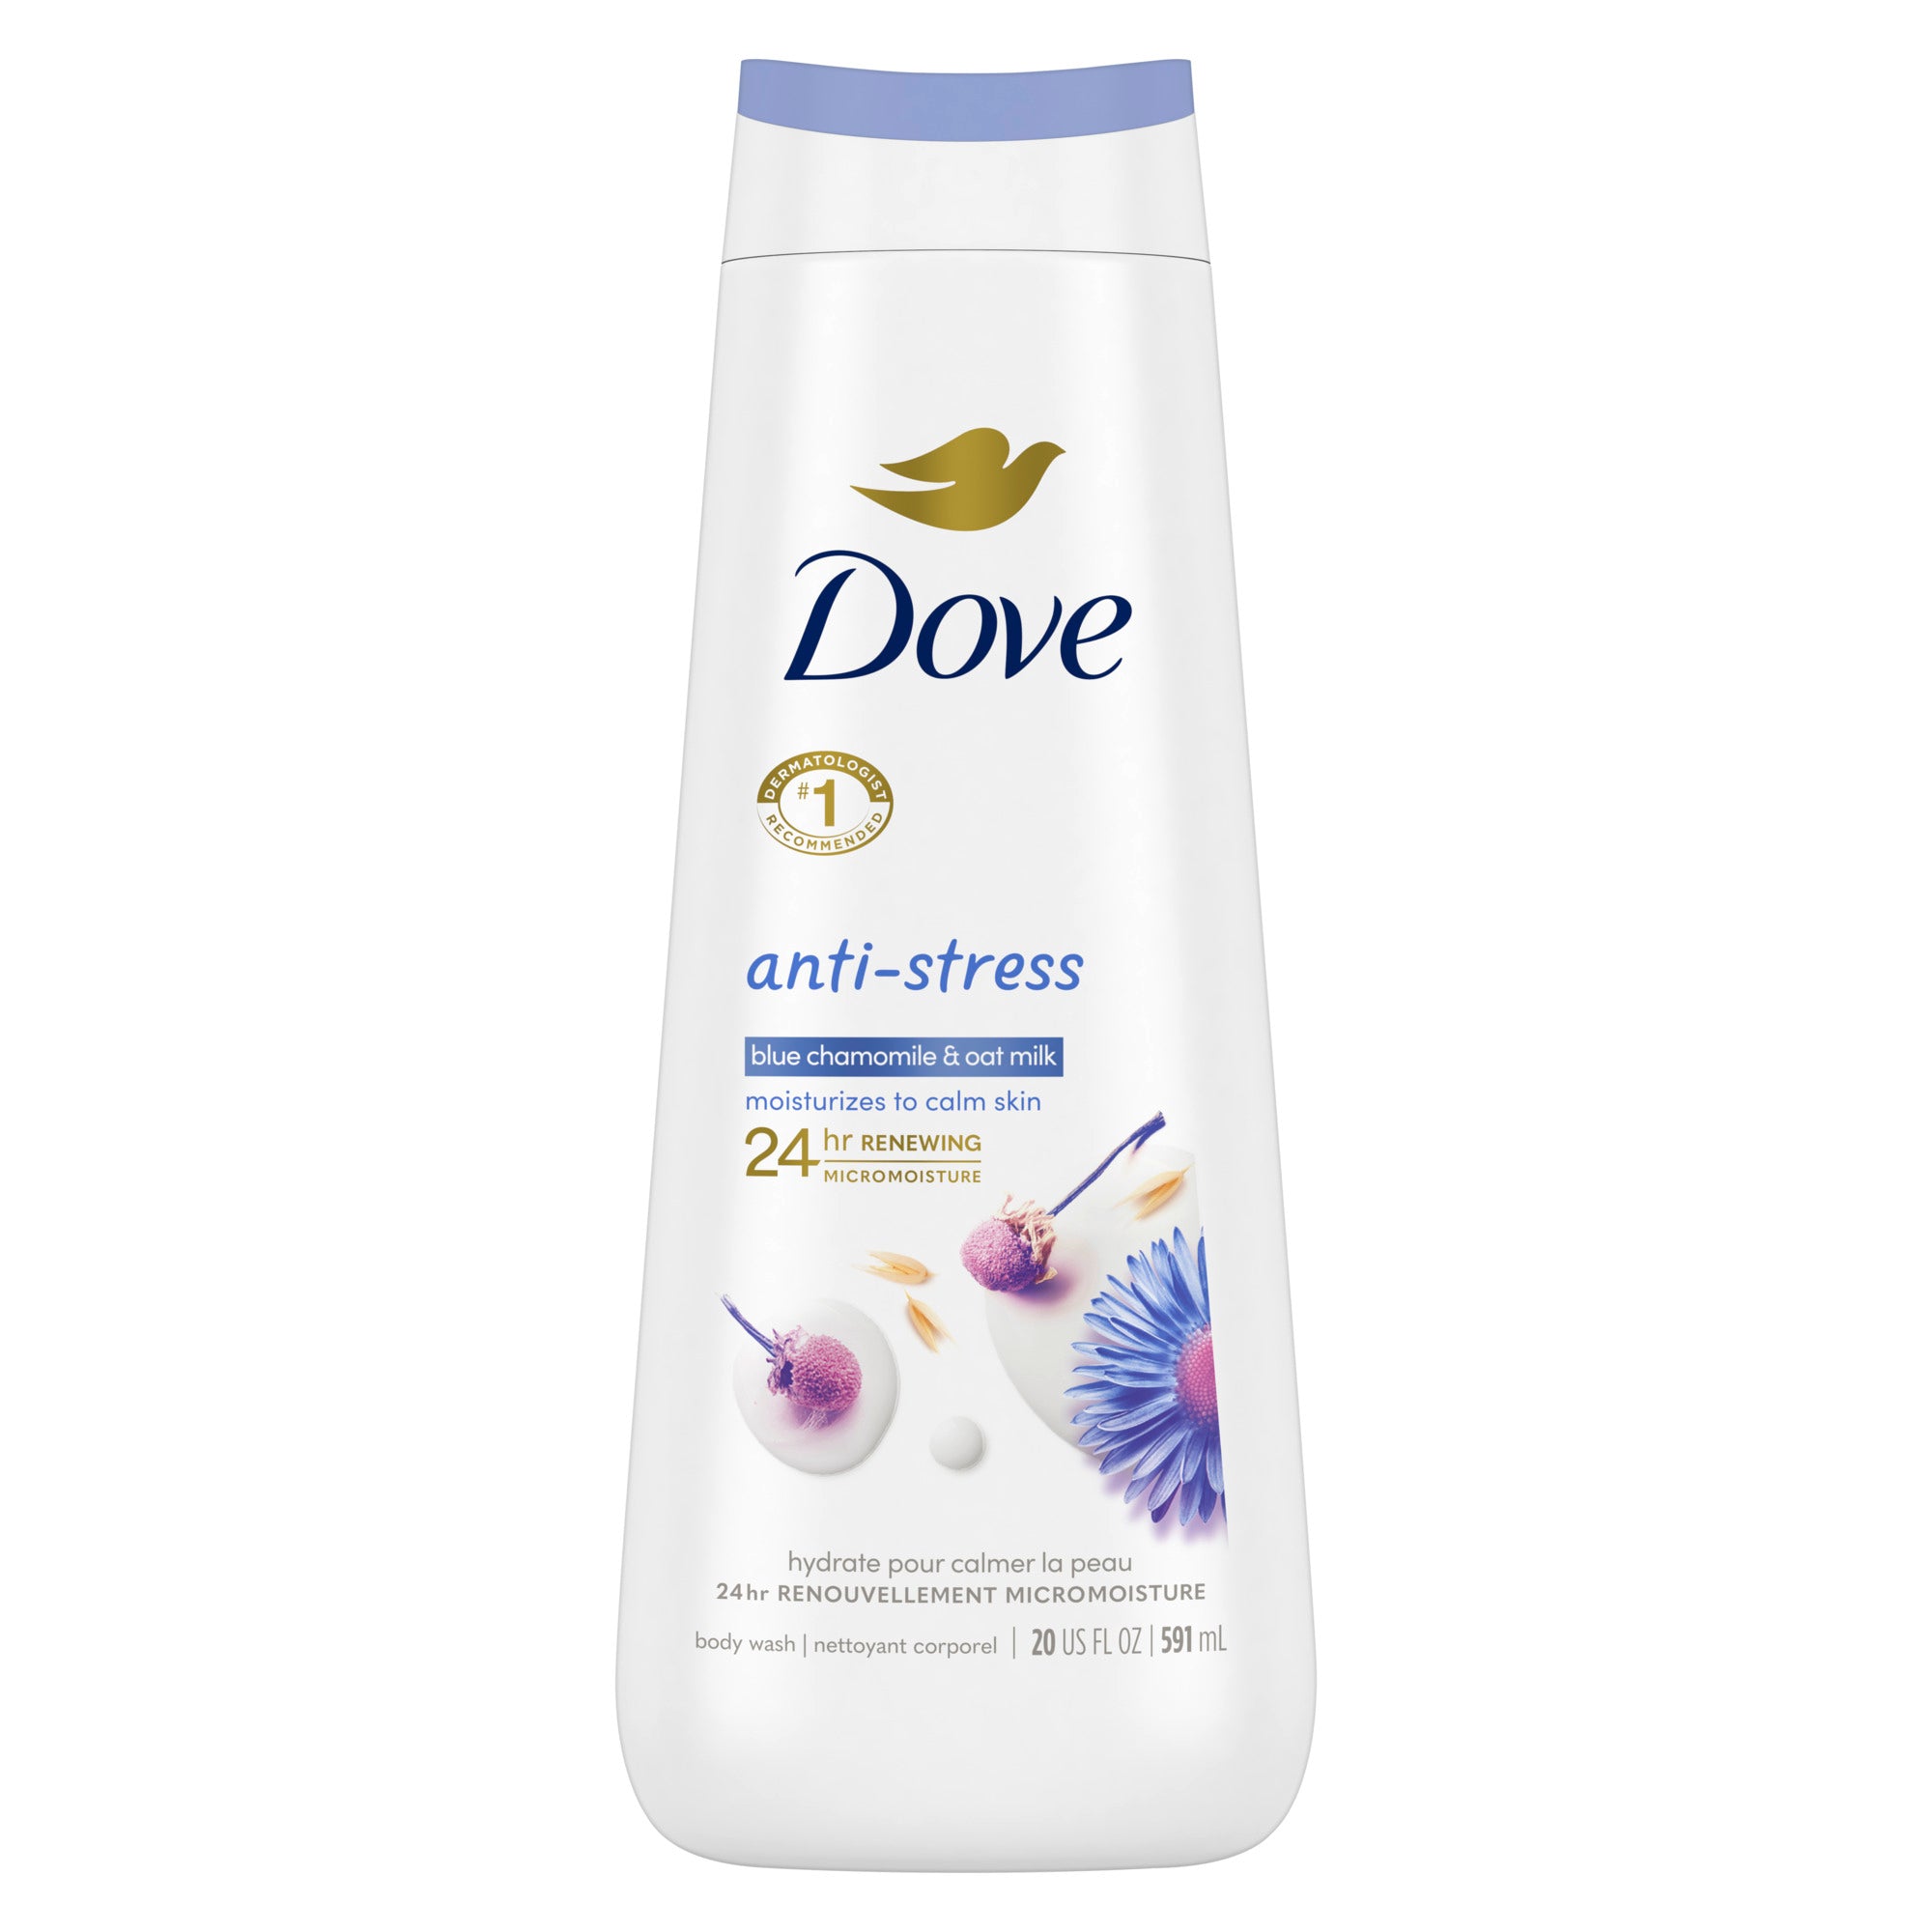 Showing the front angle view of the Dove Anti Stress Blue Chamomile & Oat Milk Body Wash 650ml product.